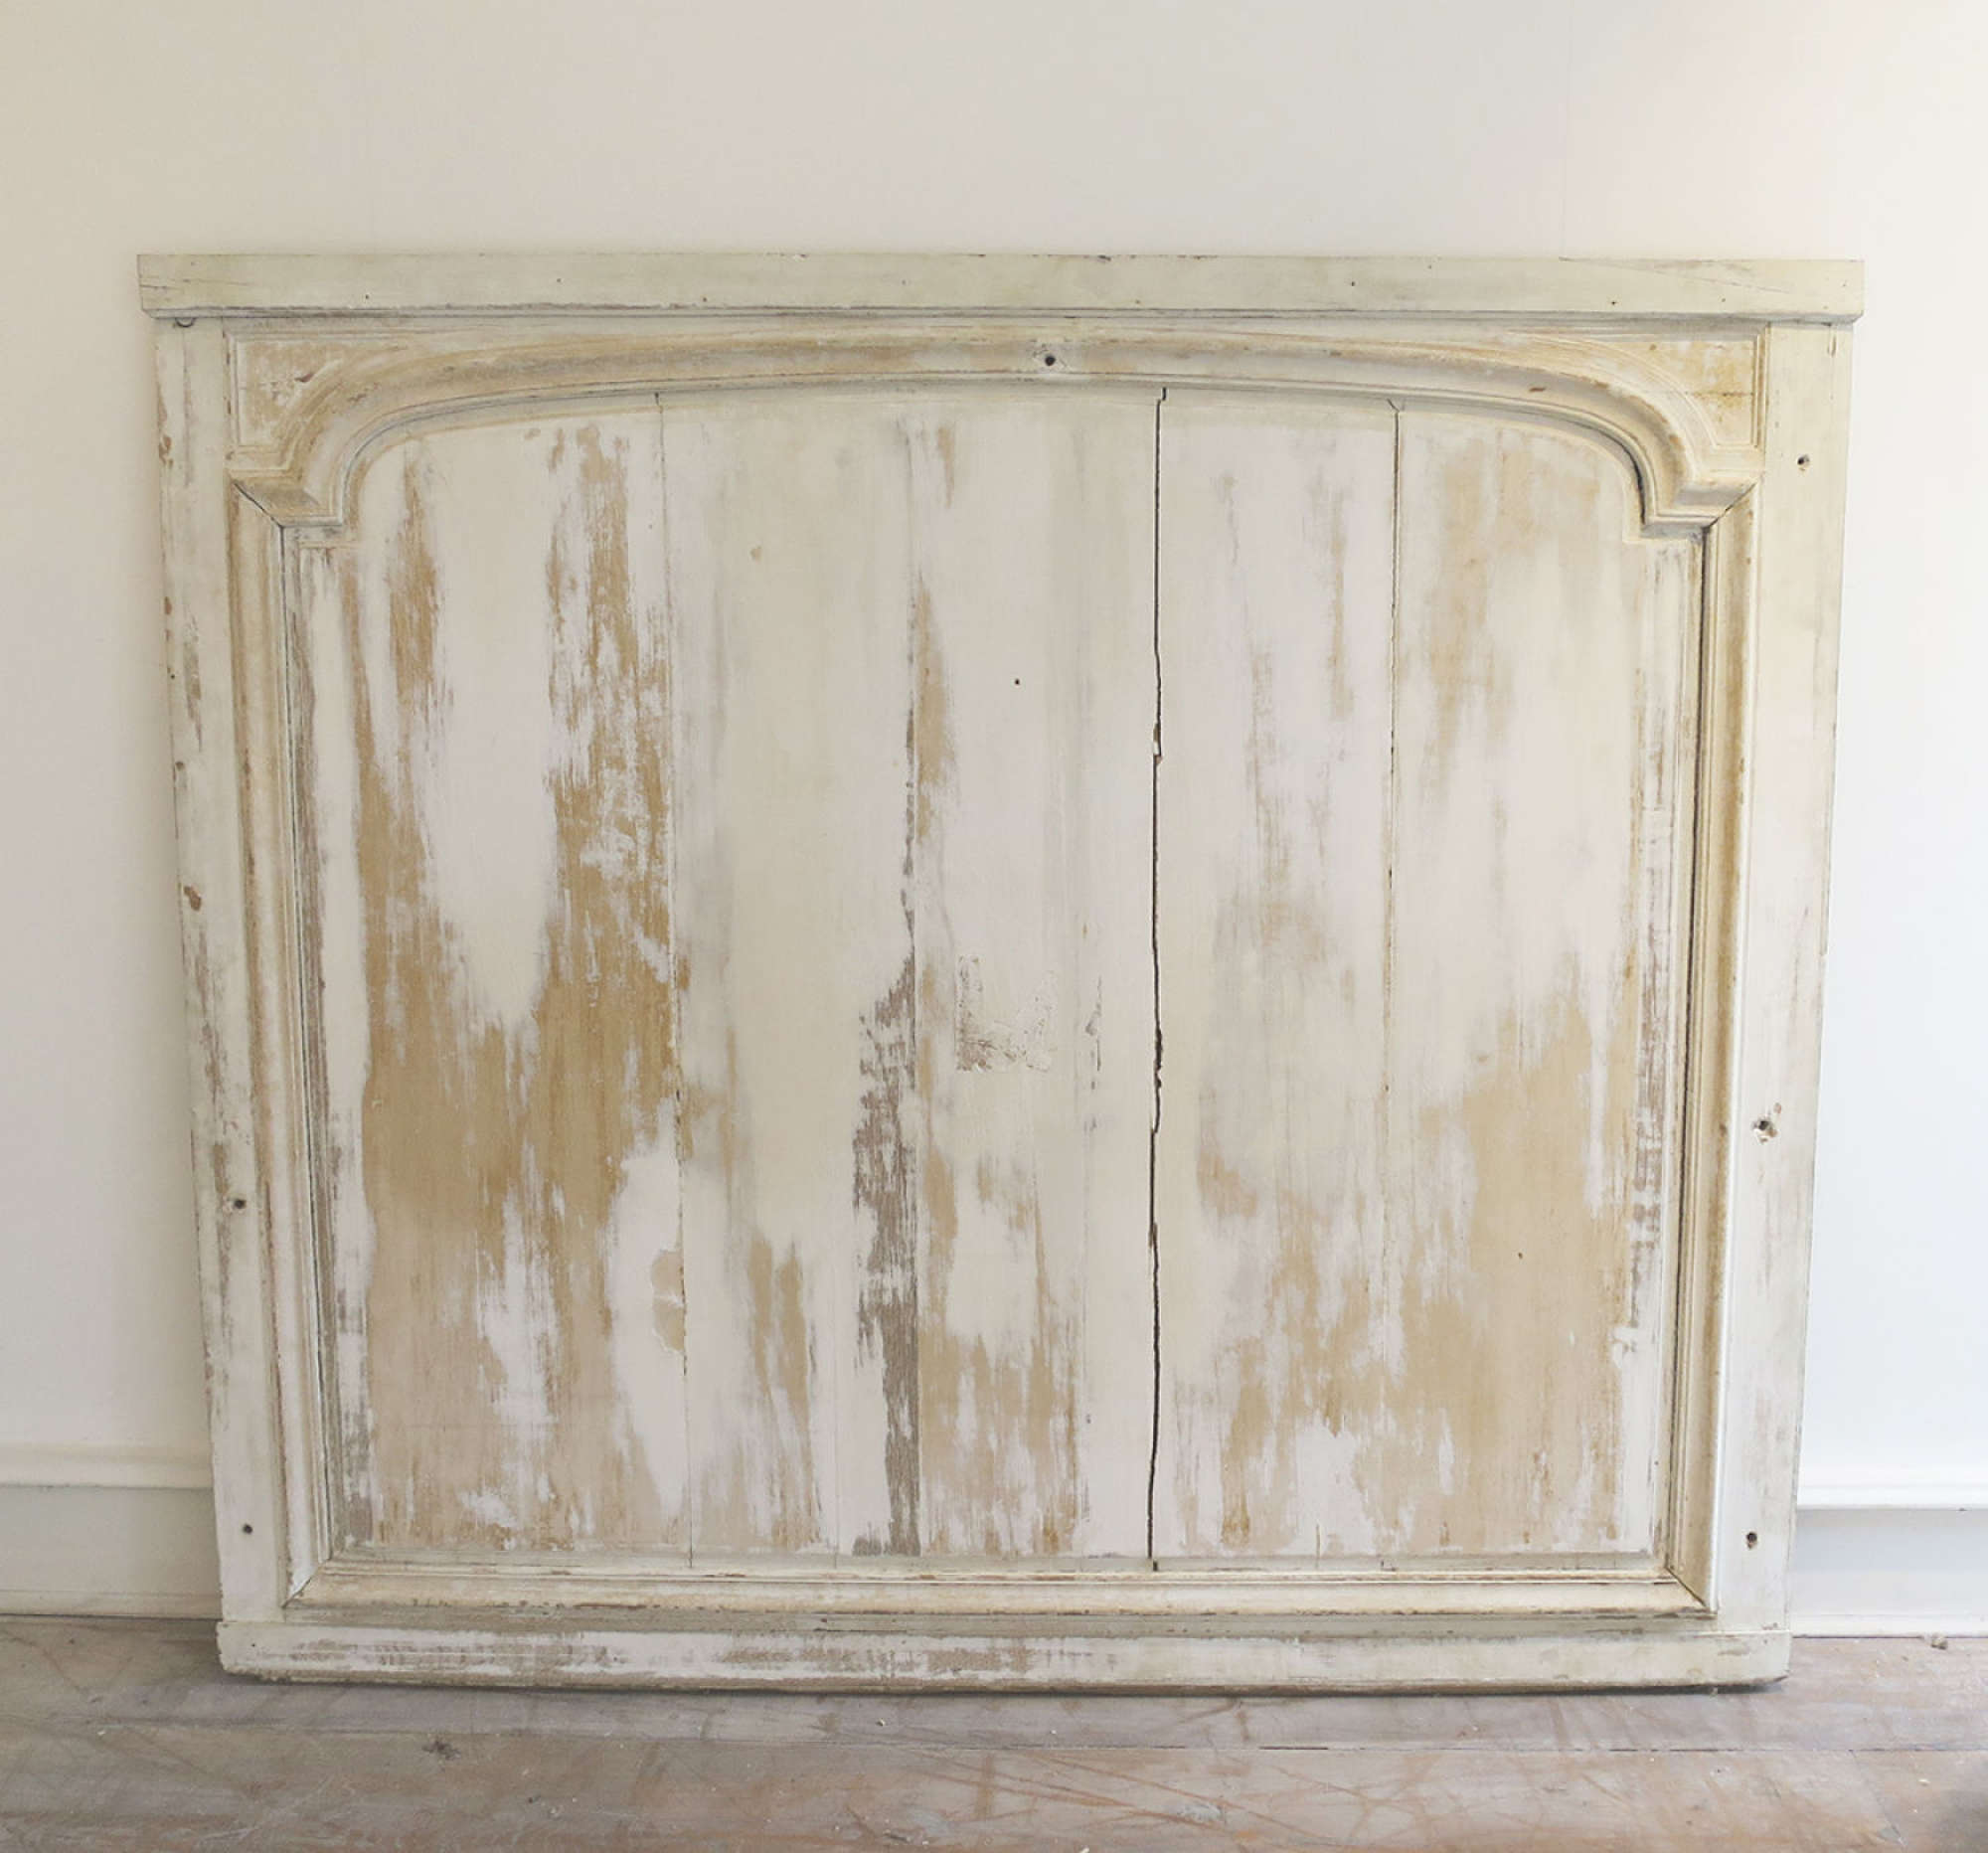 Large 18th c French Panel with remains of old paint - circa 1750